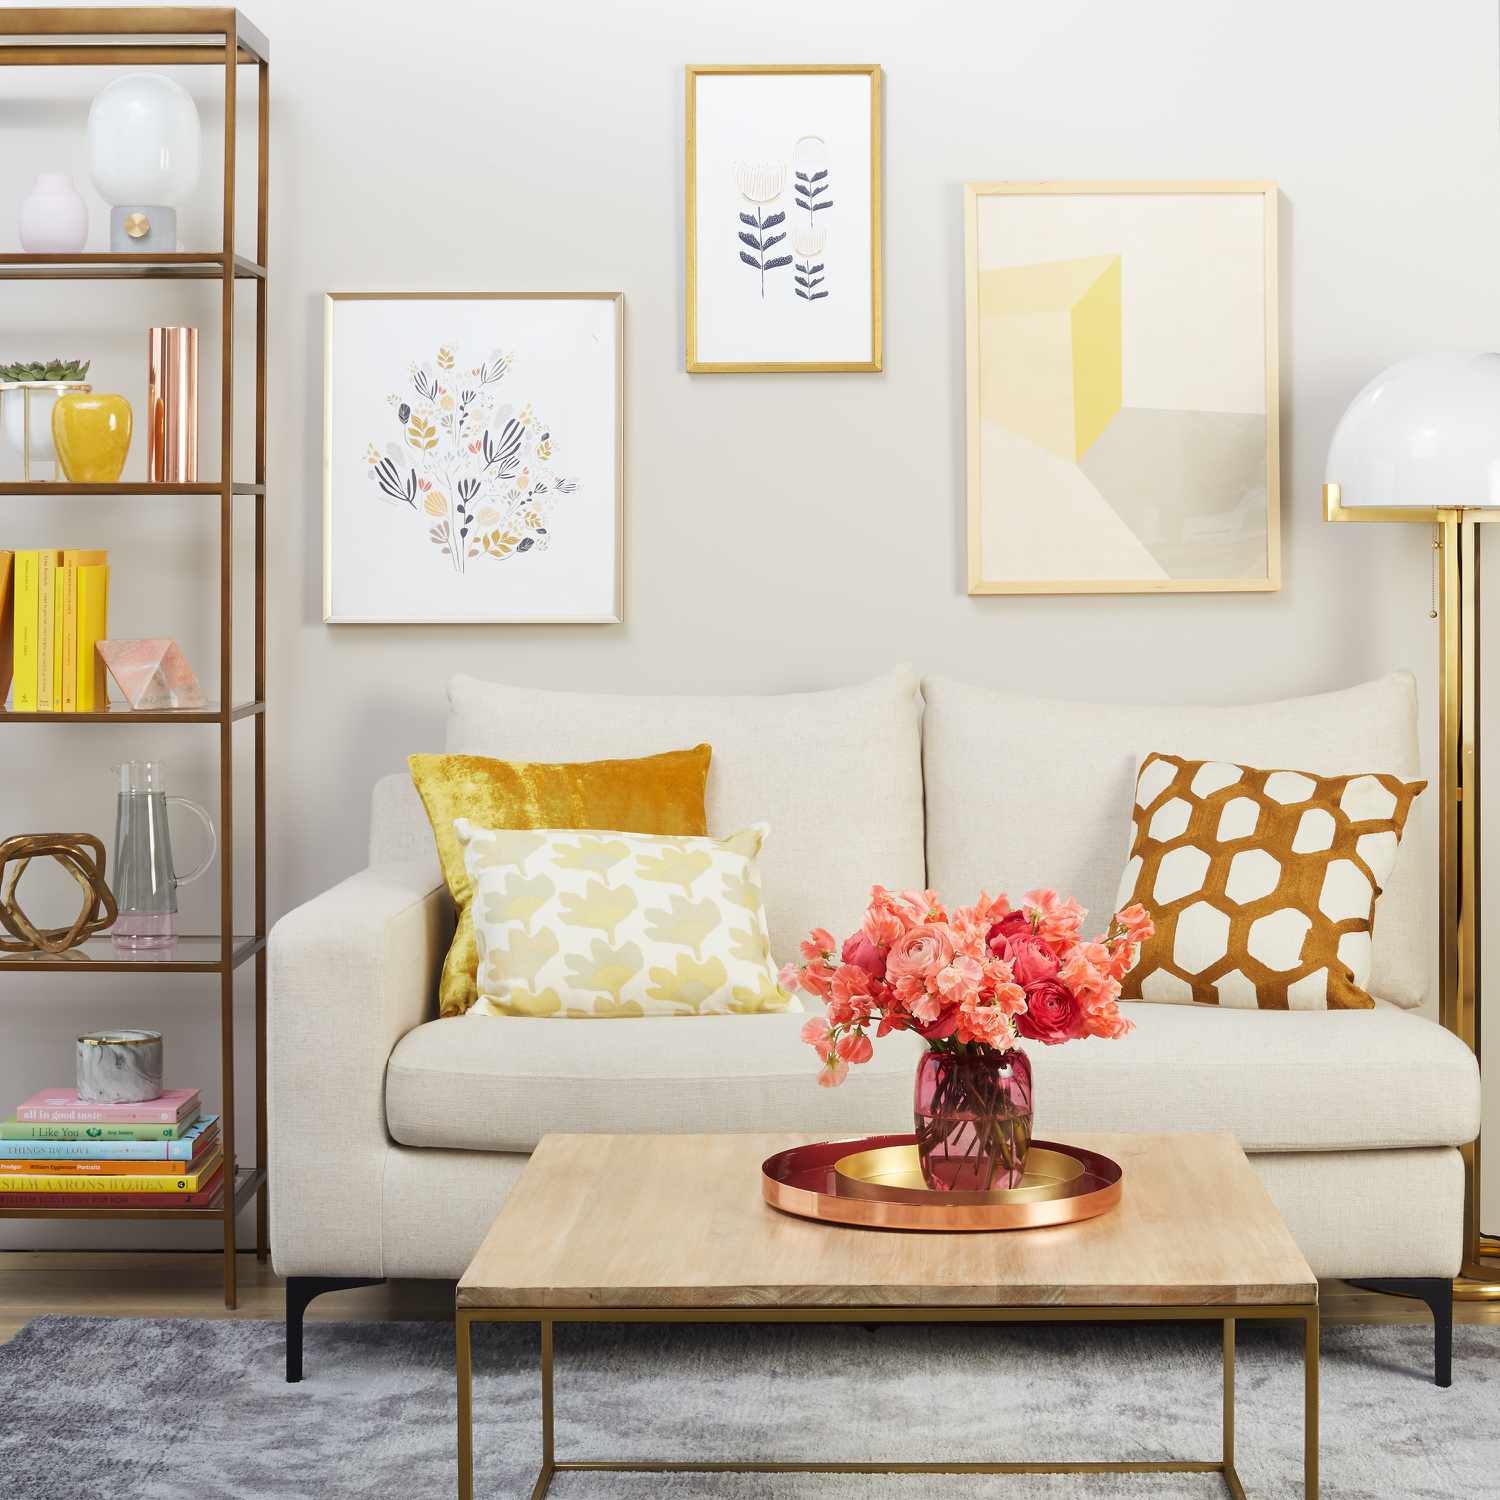 Seven Decorating Tips That Will Make Your Small Space Look